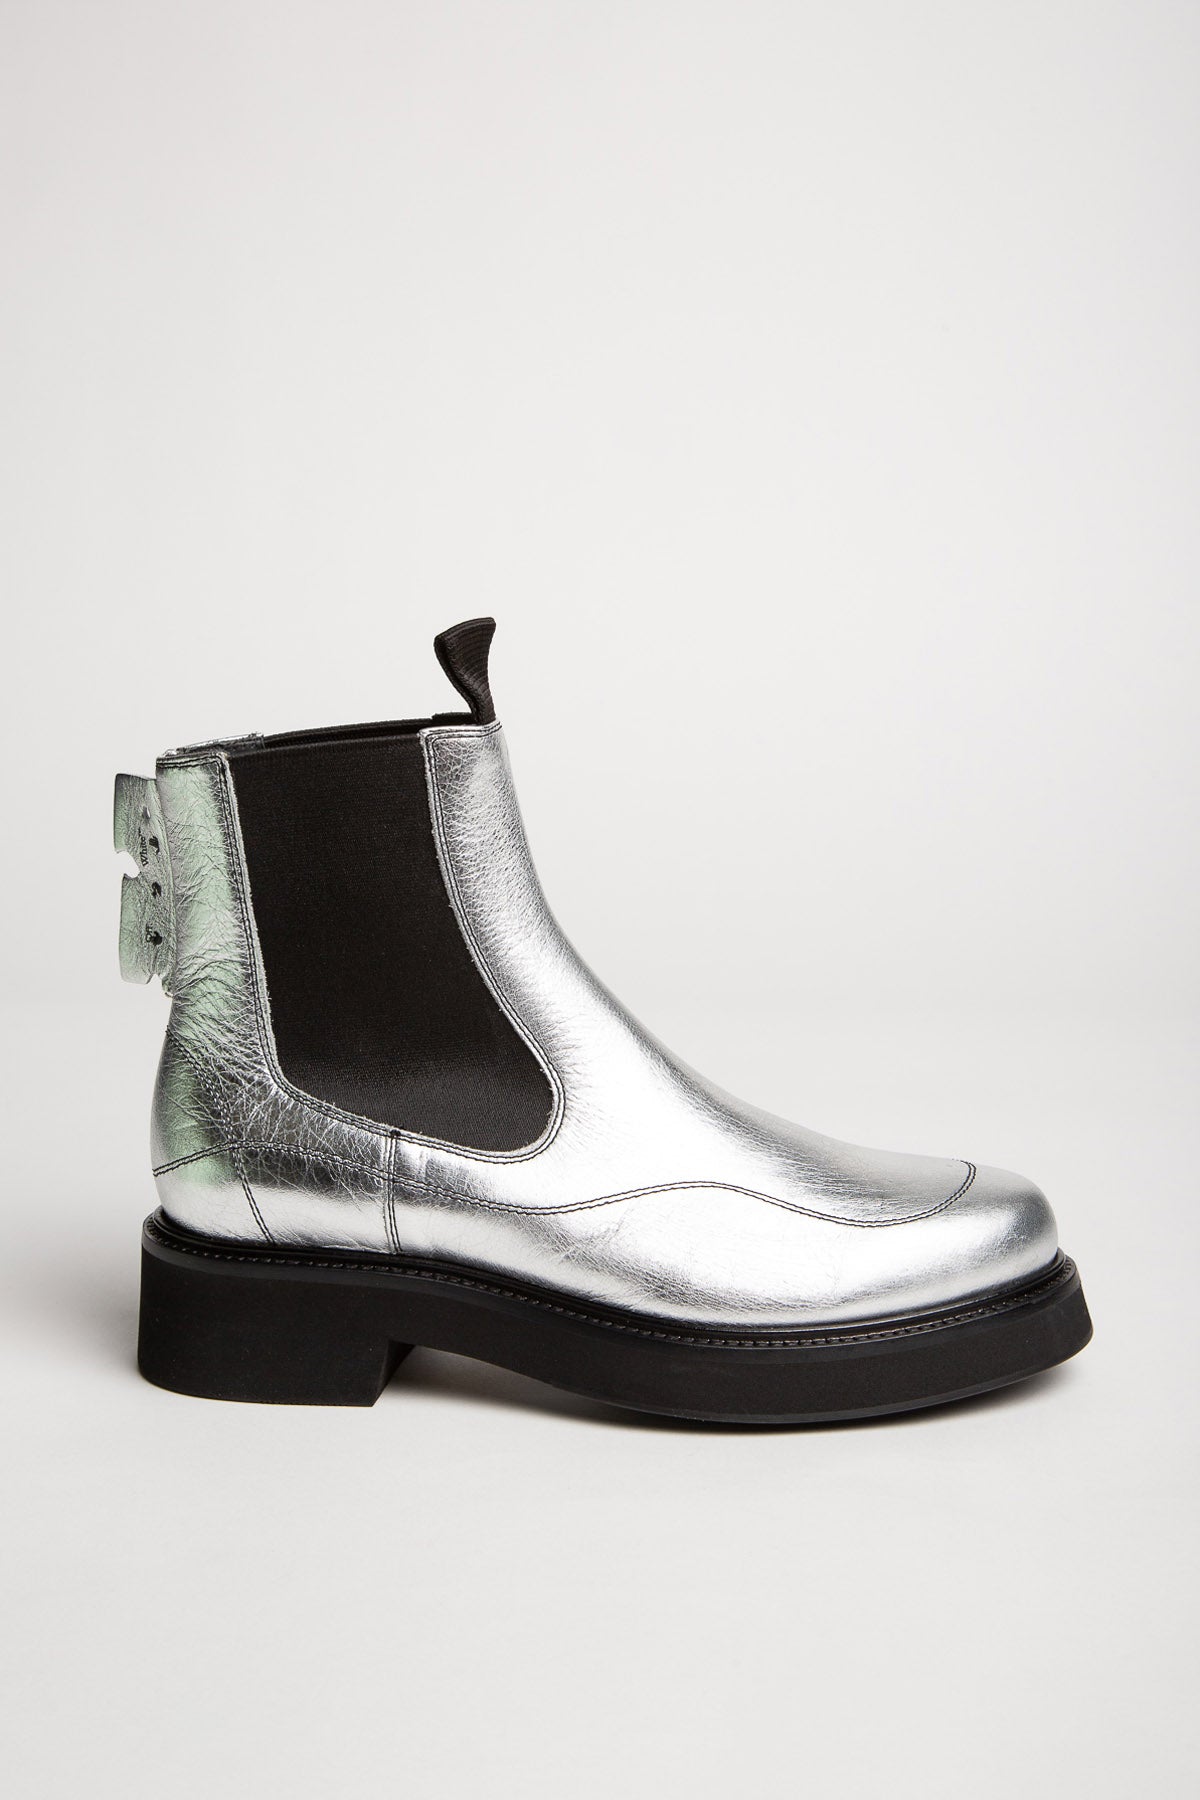 OFF-WHITE | SILVER LAMINATE CHELSEA BOOTS